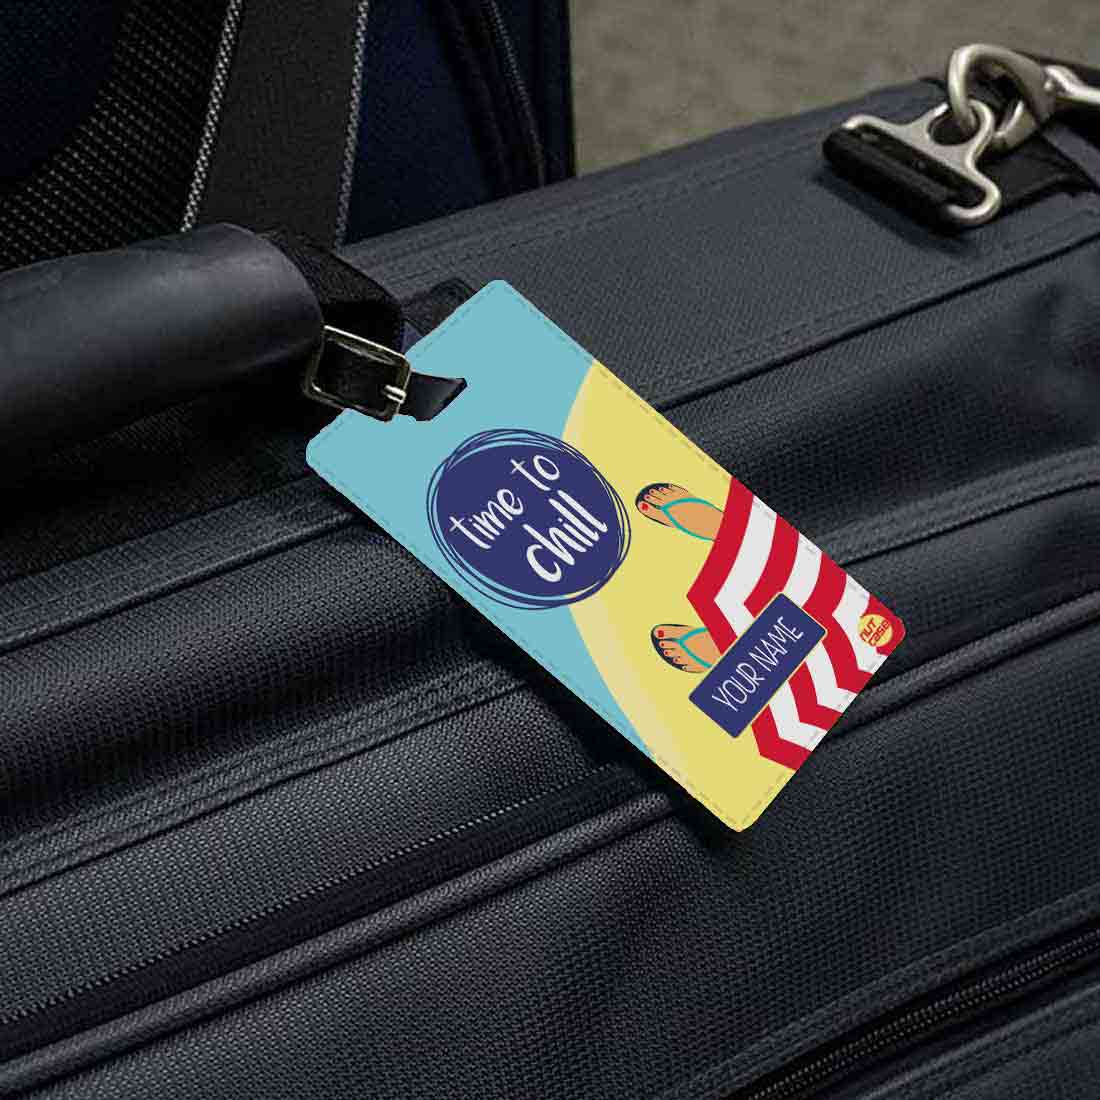 Best Personalized Luggage Tags Suitcase Add Name Set of 2 - Chill